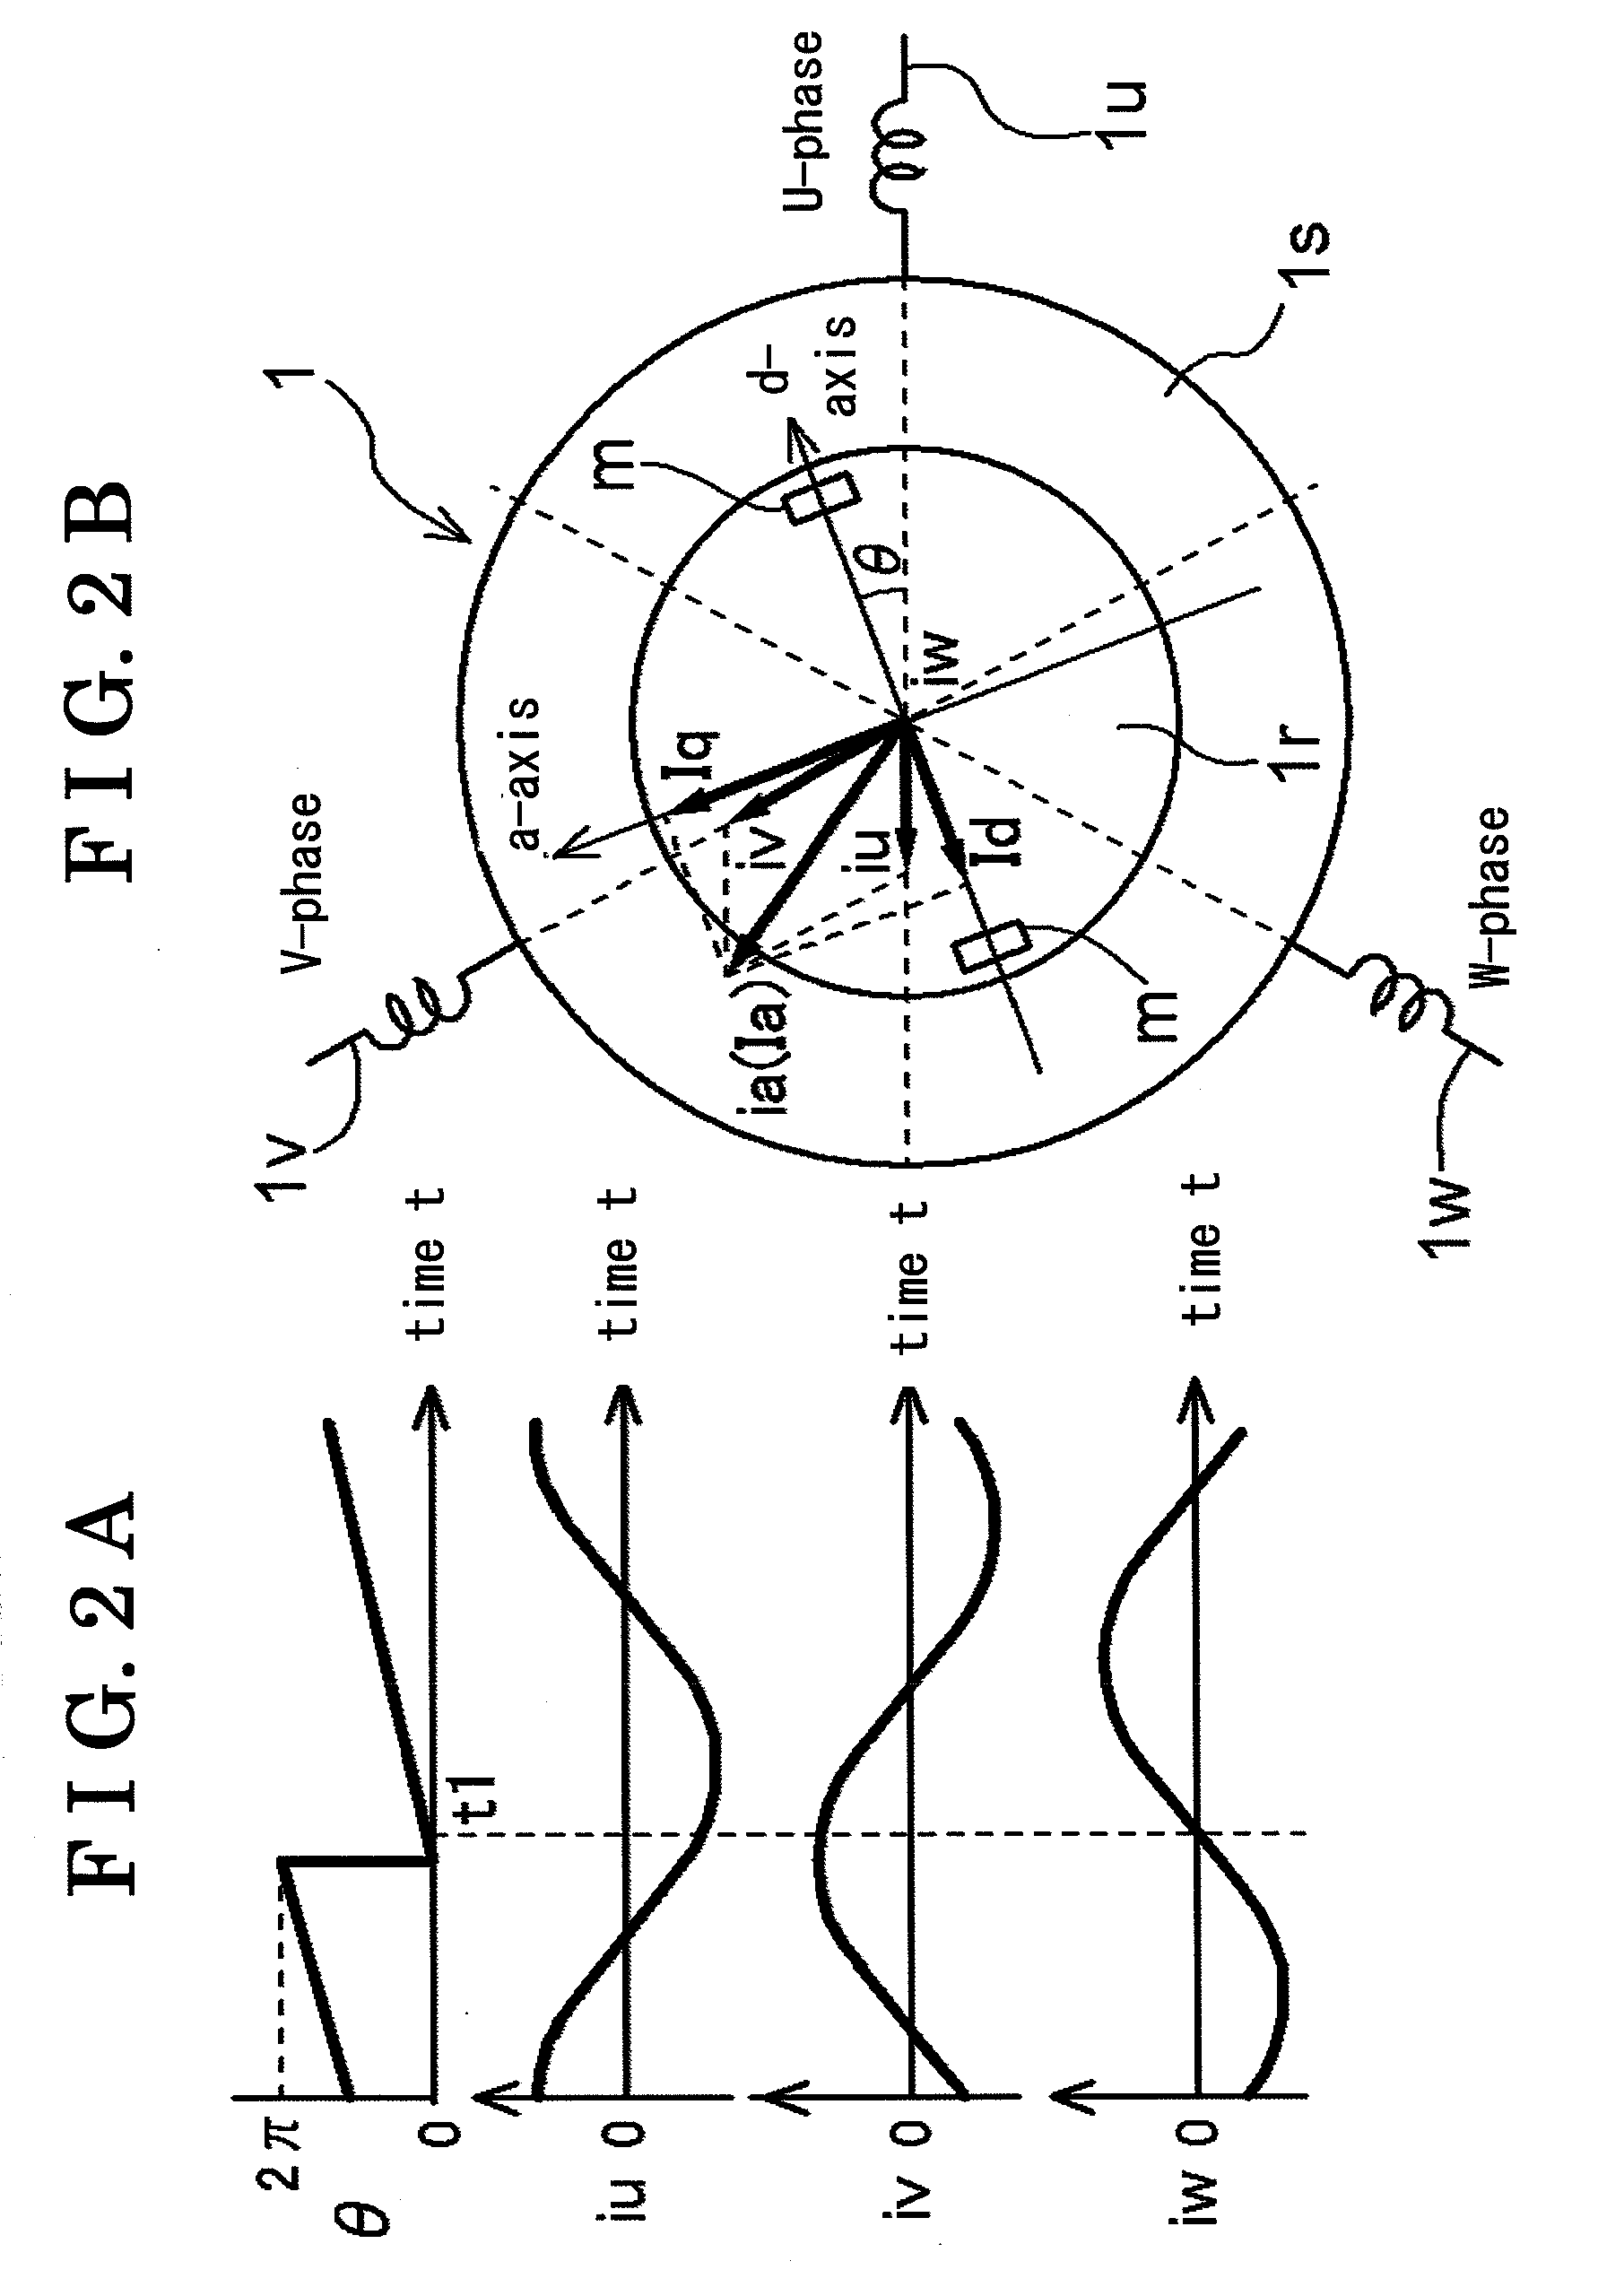 Synchronous motor control device and method for optimizing synchronous motor control